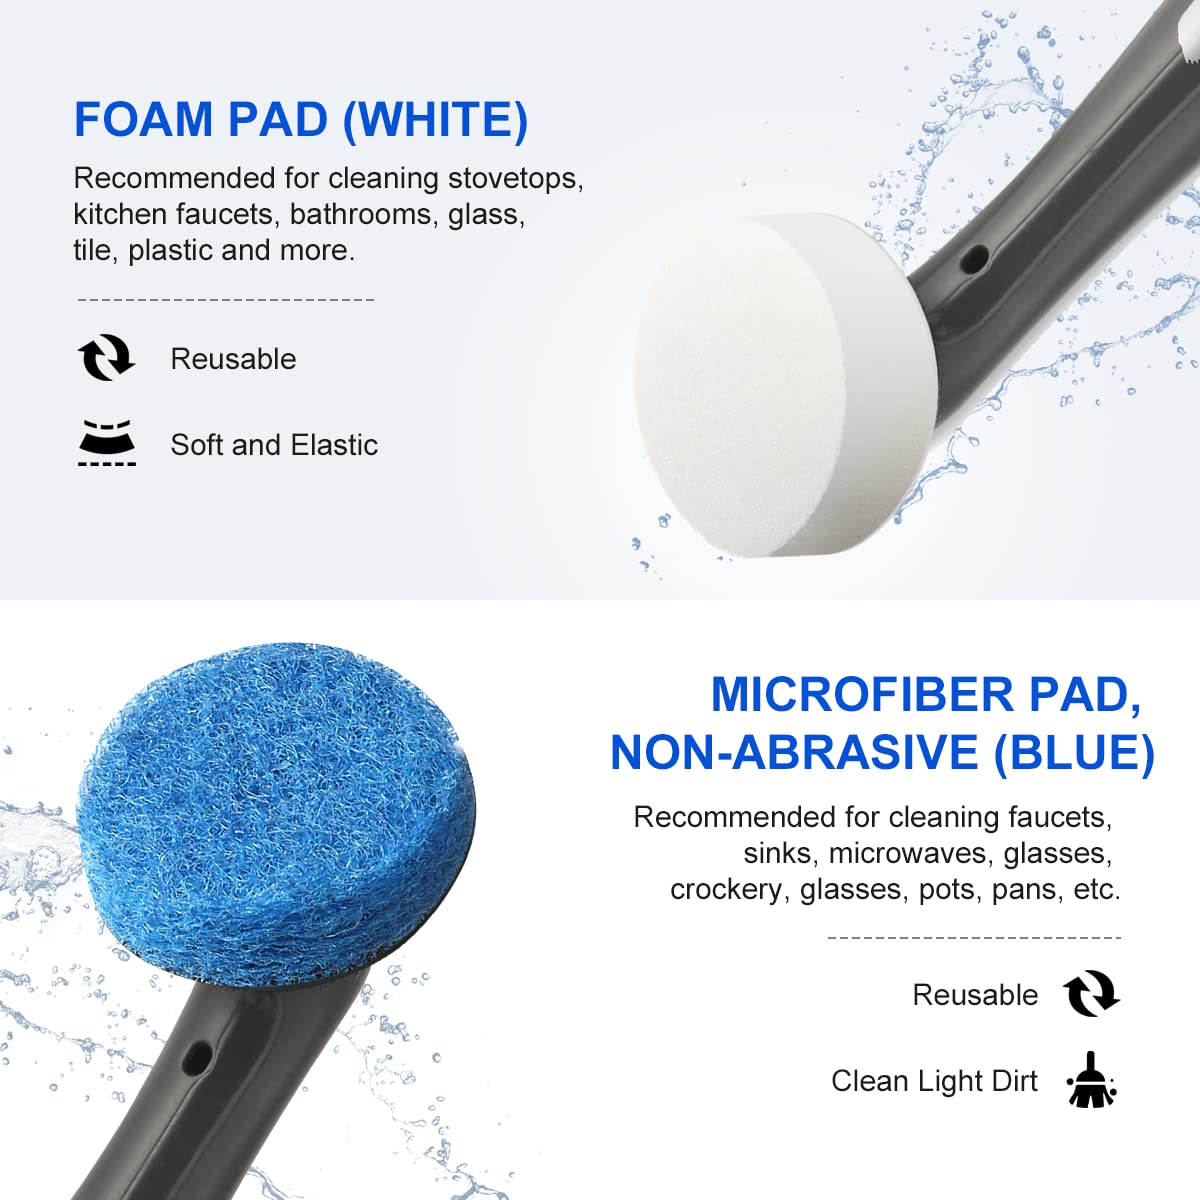 The white foam pad is great for removing stubborn dirt from countertops, glass surfaces, floors, baseboards, doors and shoes；the blue microfiber pad is perfect for cleaning the kitchen and bathroom.